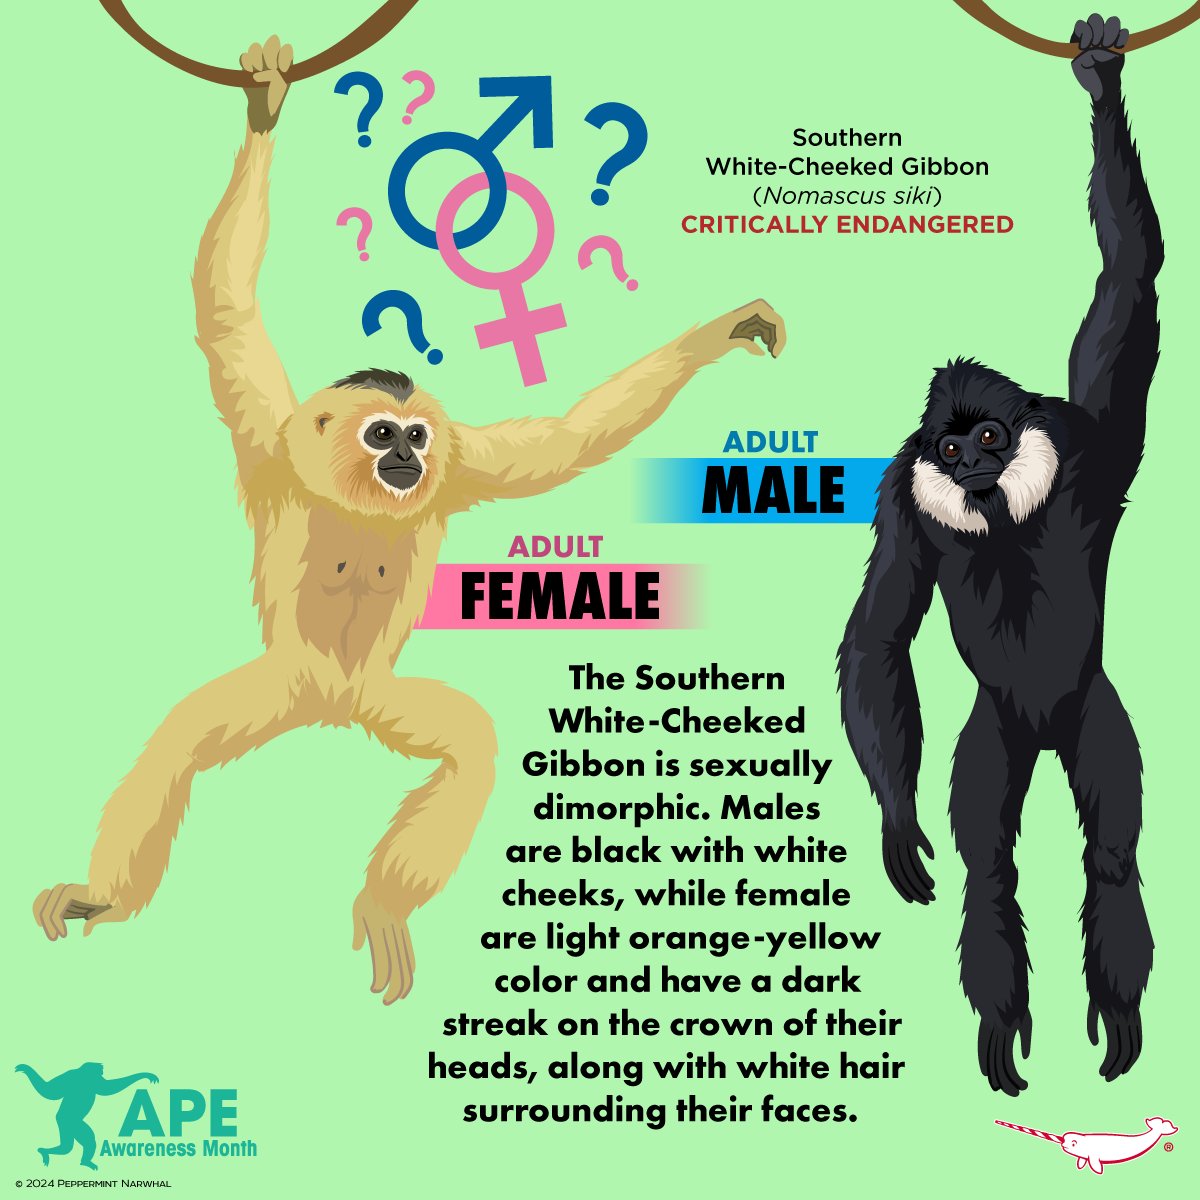 #MaleOrFemale #SouthernWhiteCheekedGibbon #ApeAwarenessMonth #Ape Merch: peppermintnarwhal.com/s/search?q=gor… ...and for more great animal merch Shop #PeppermintNarwhal: peppermintnarwhal.com #ApeAwareness #Gibbon